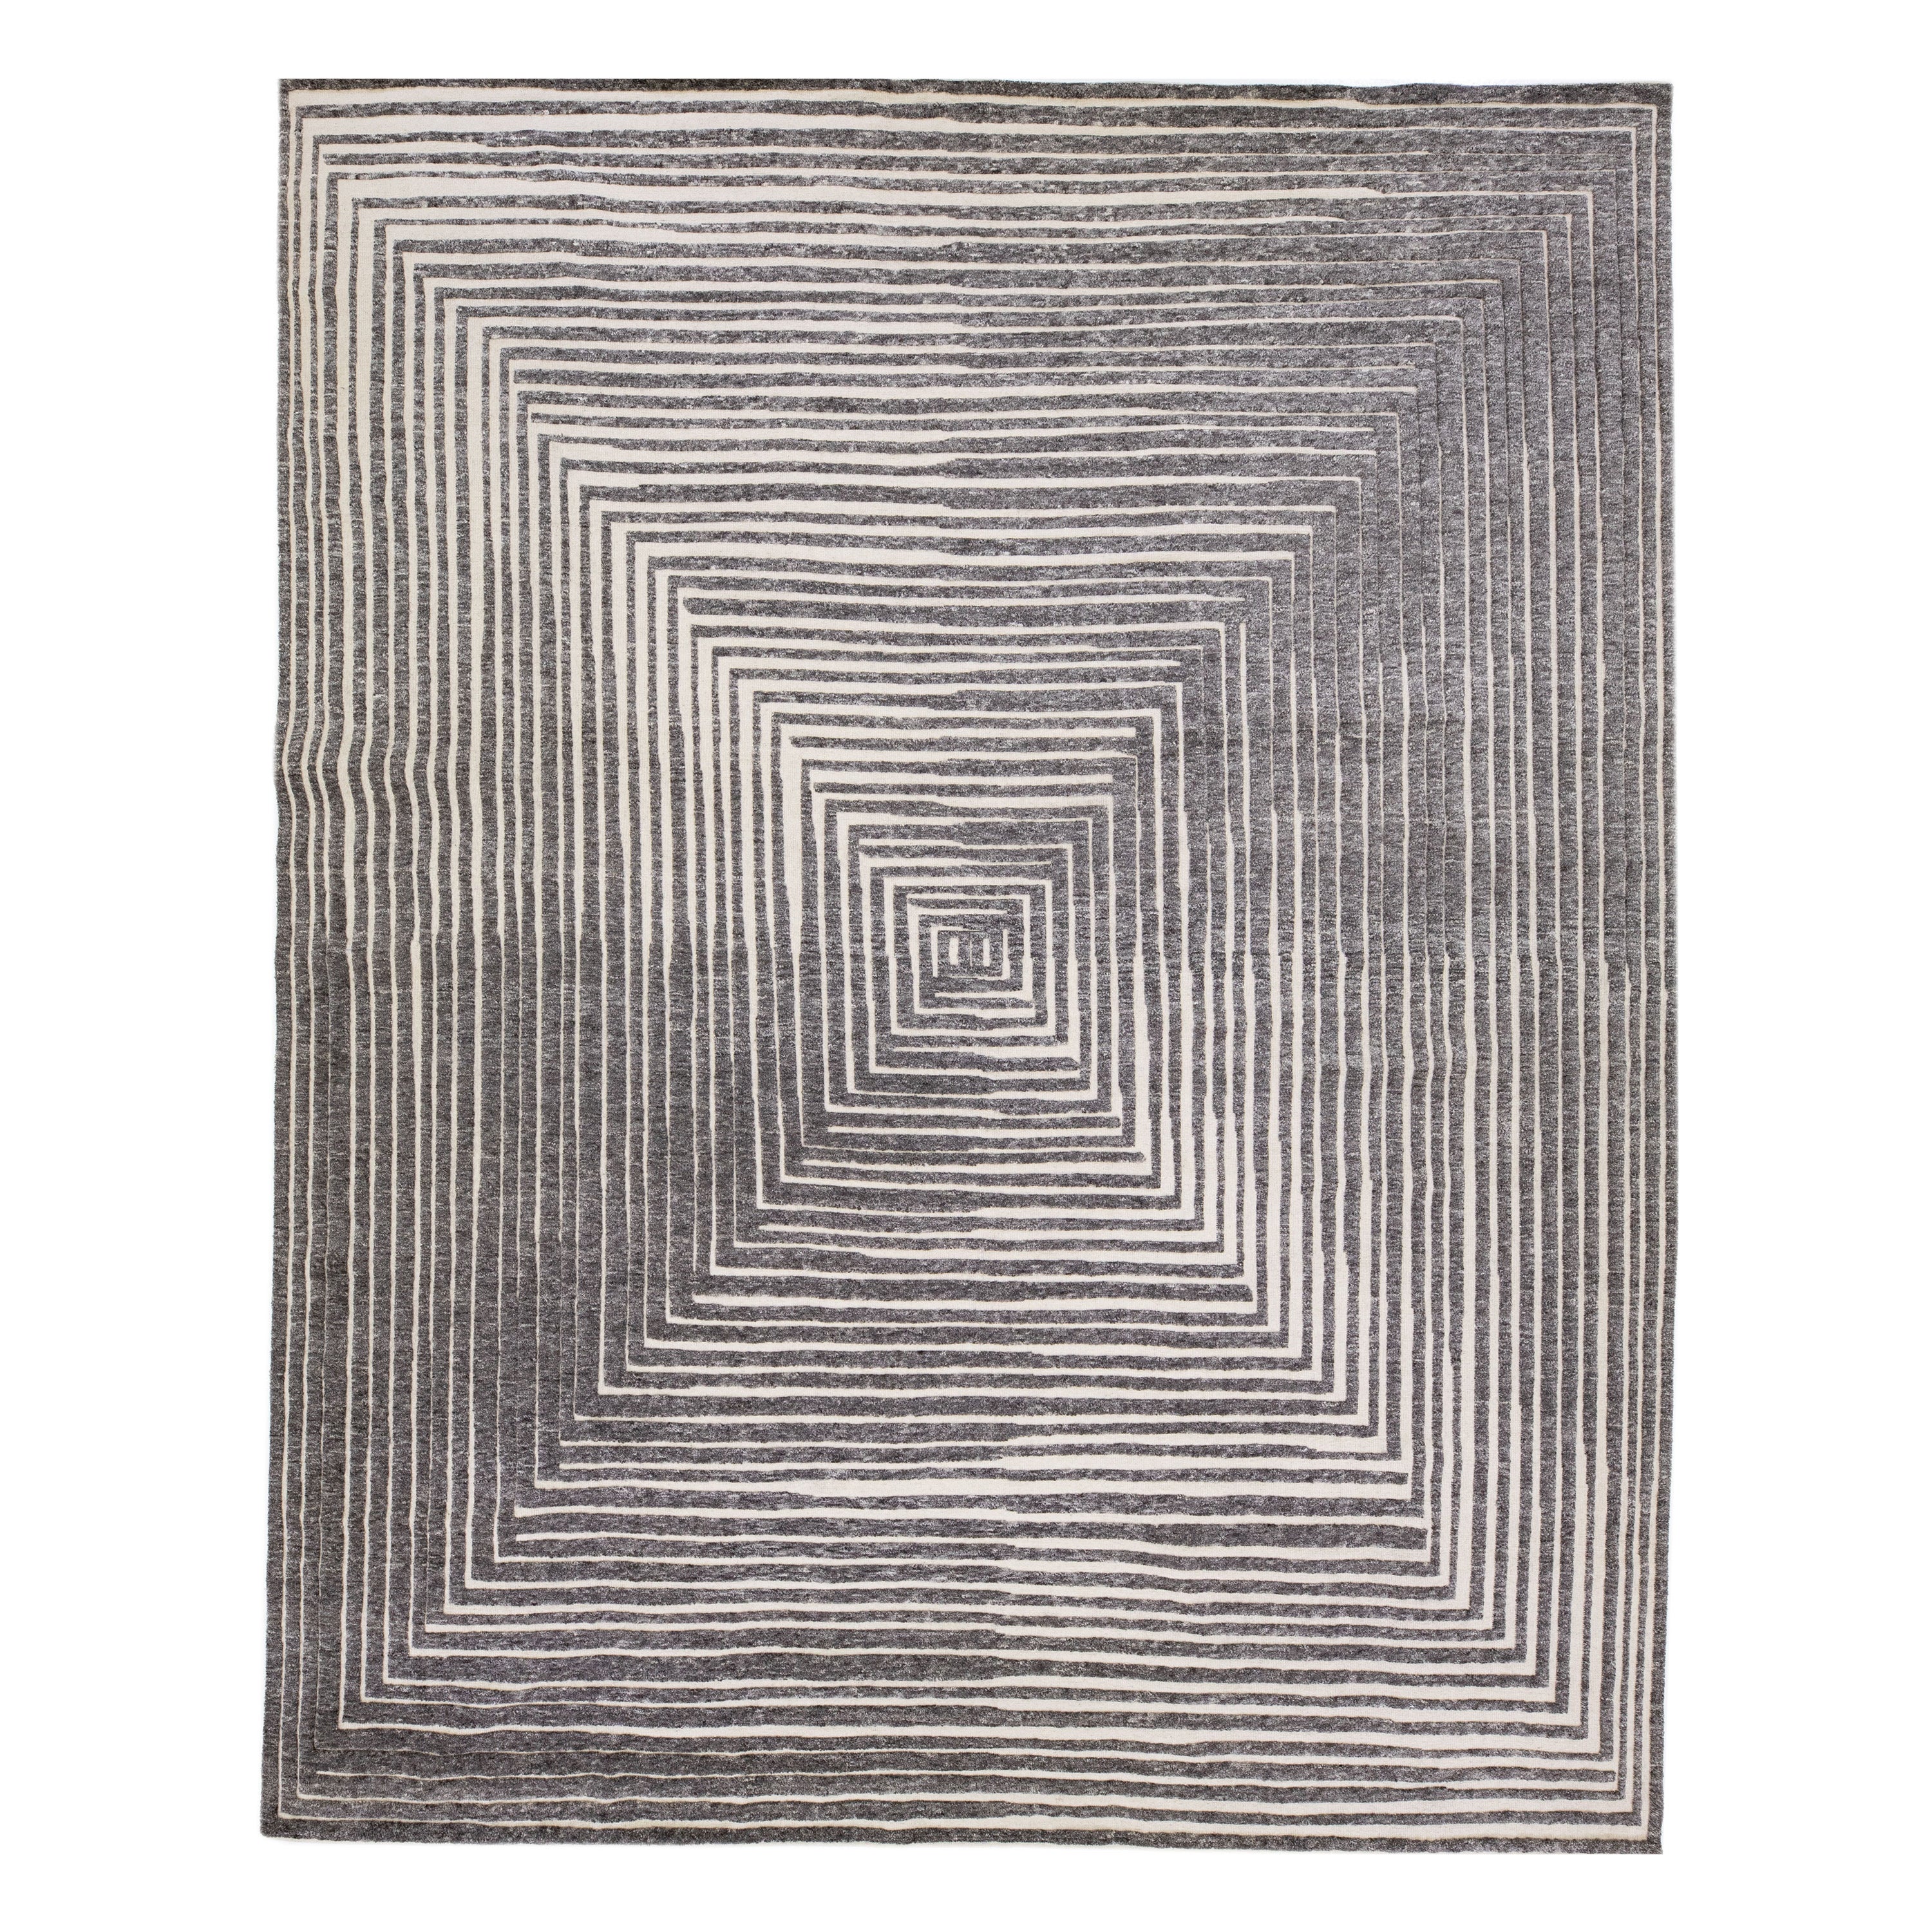 Oversize Modern Moroccan Style Gray Wool Rug with Op Art Design by Apadana For Sale